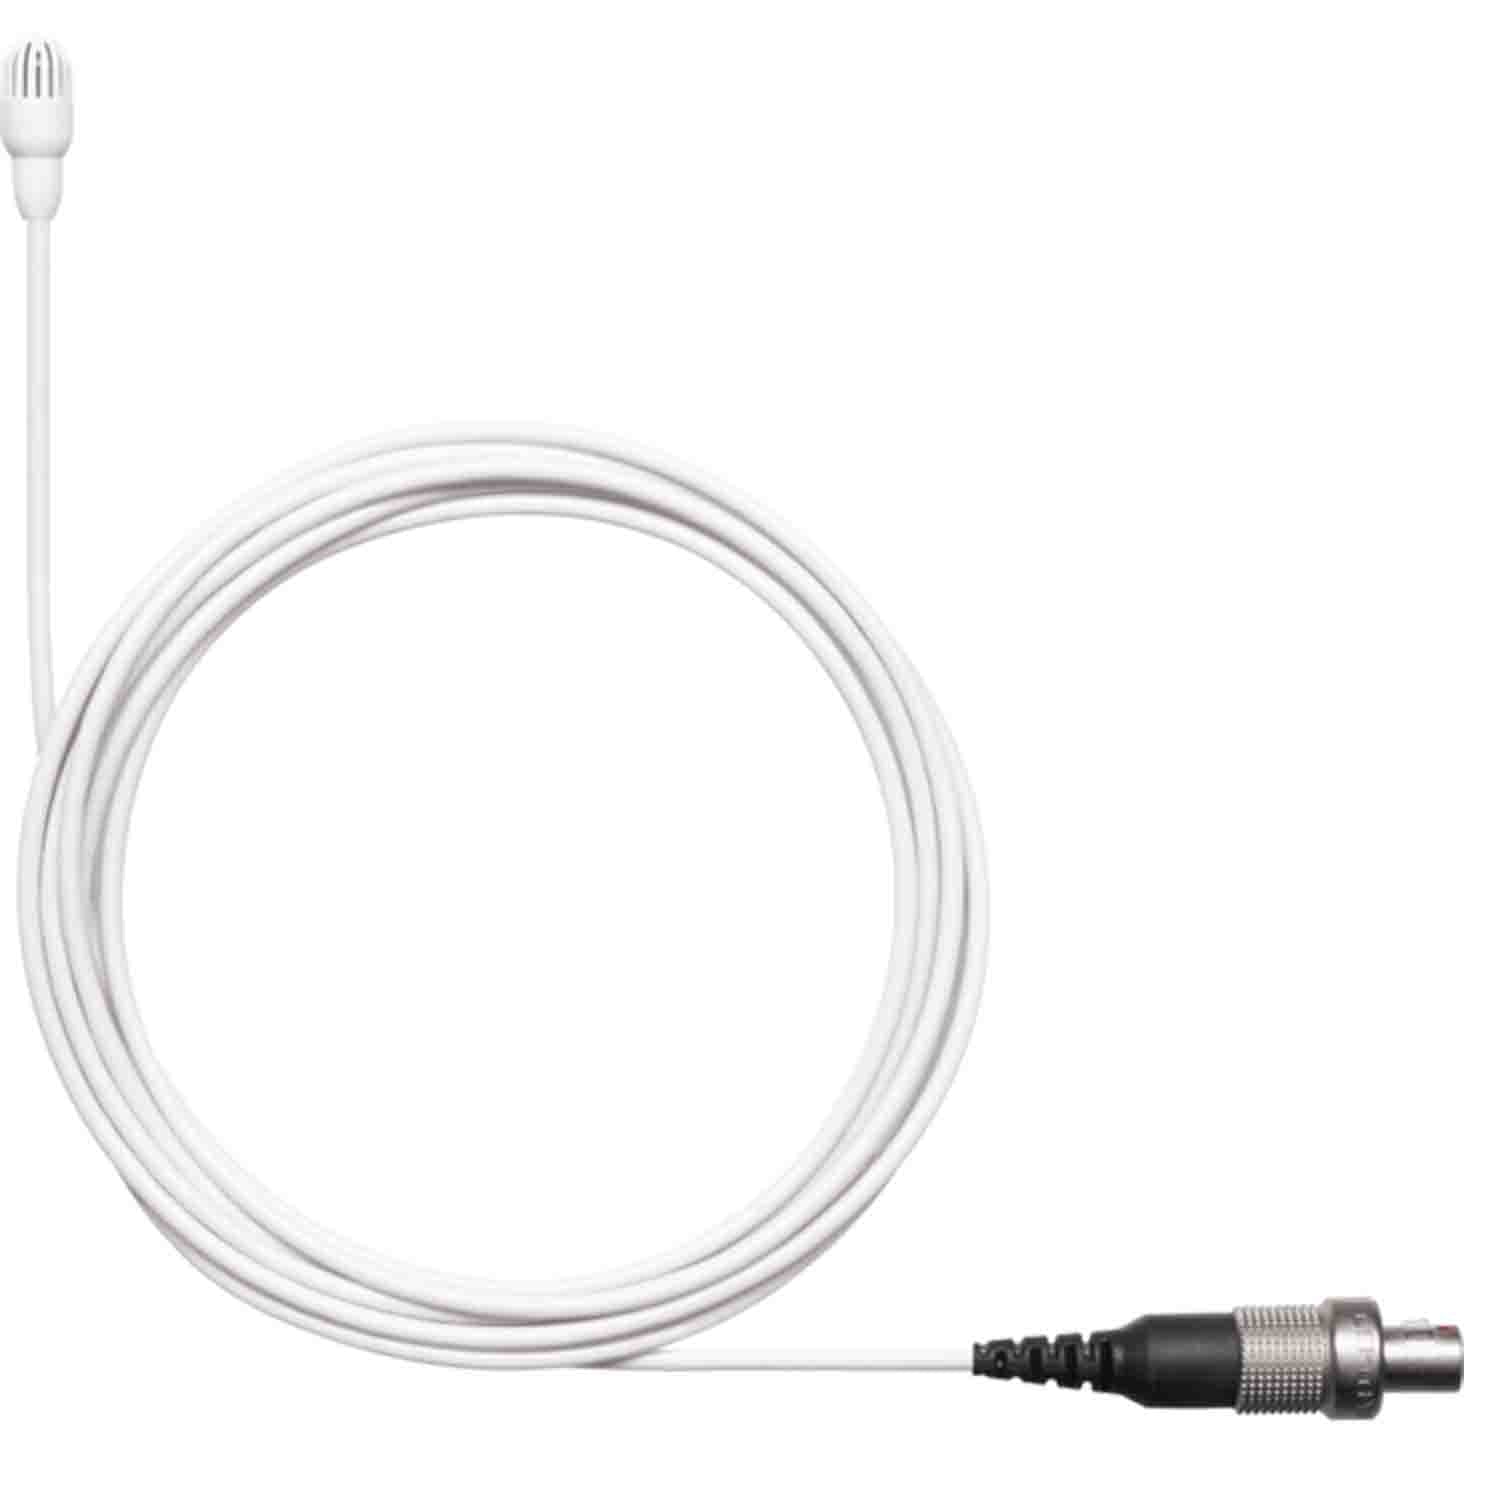 Shure TL47W/O TwinPlex TL47 Subminiature Lavalier Microphone with Accessories - White - Hollywood DJ